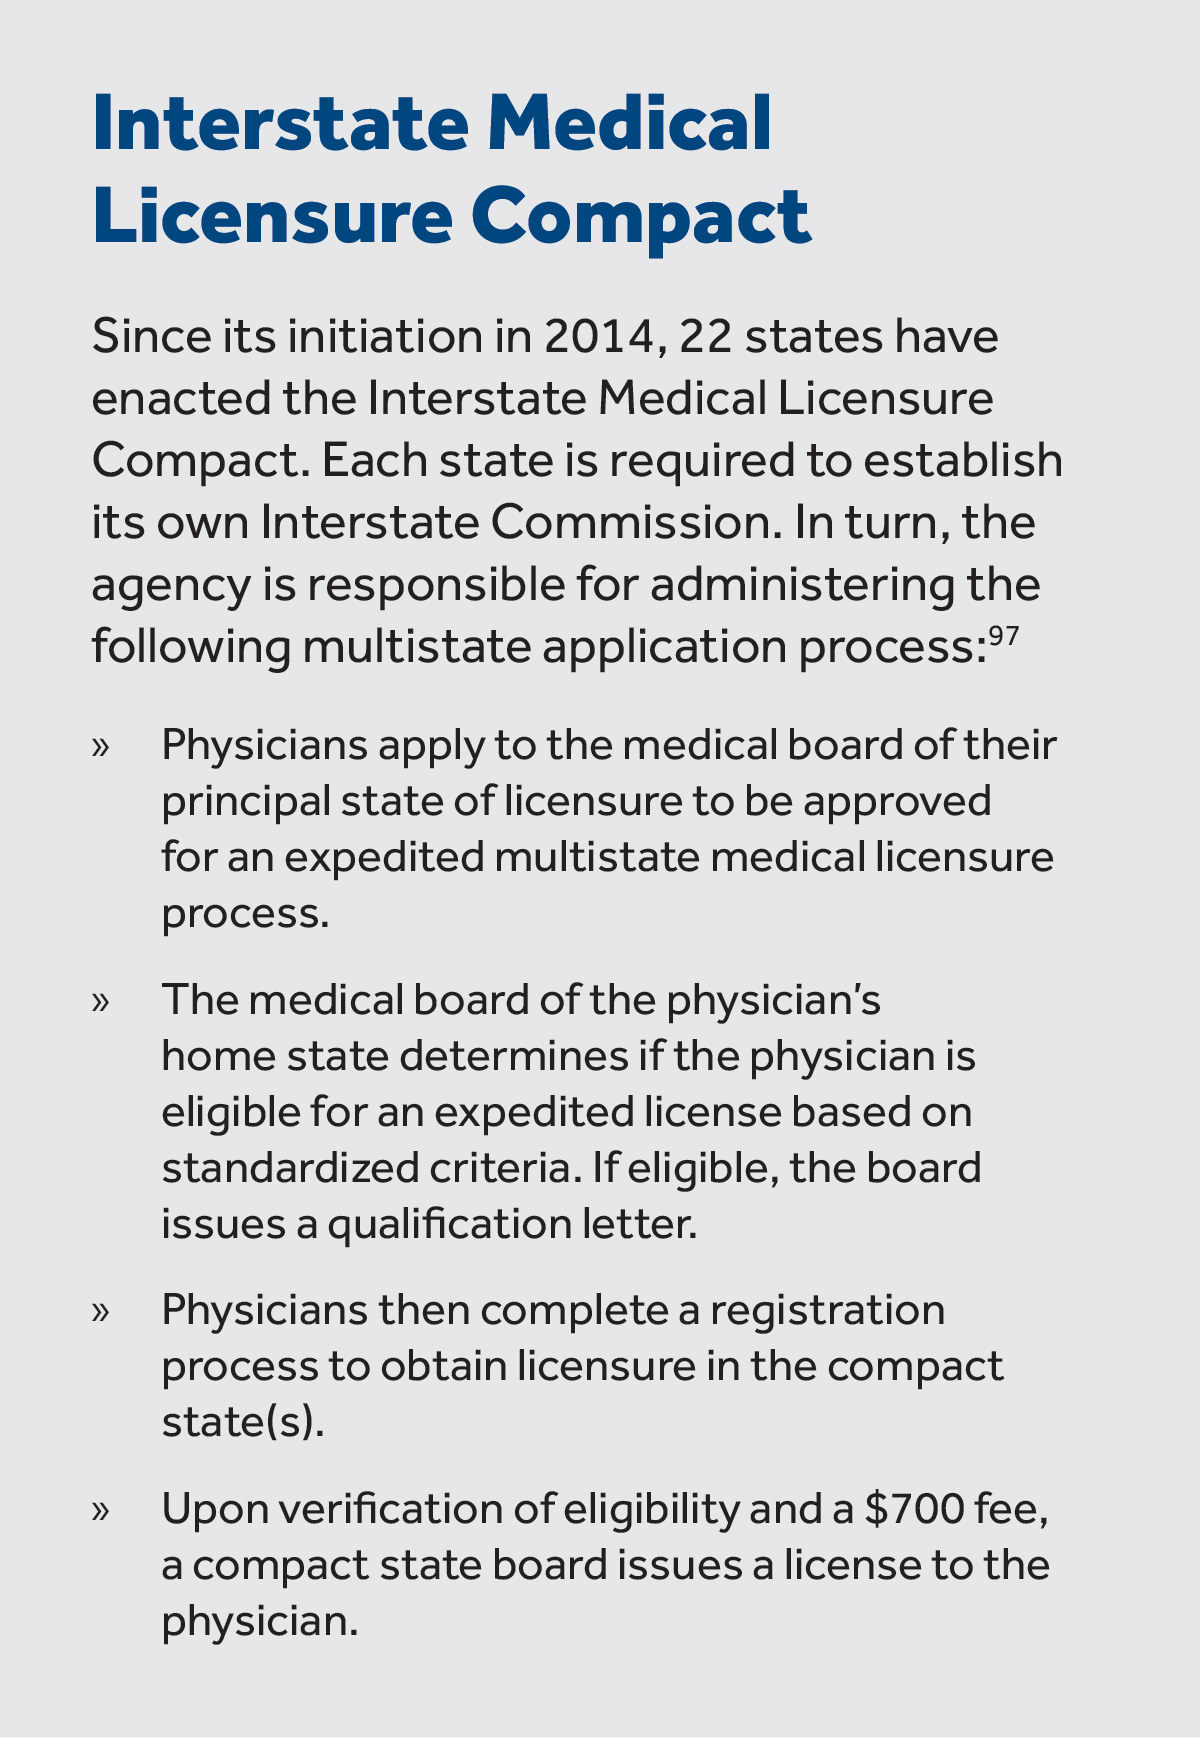 Interstate Medical Licensure Compact